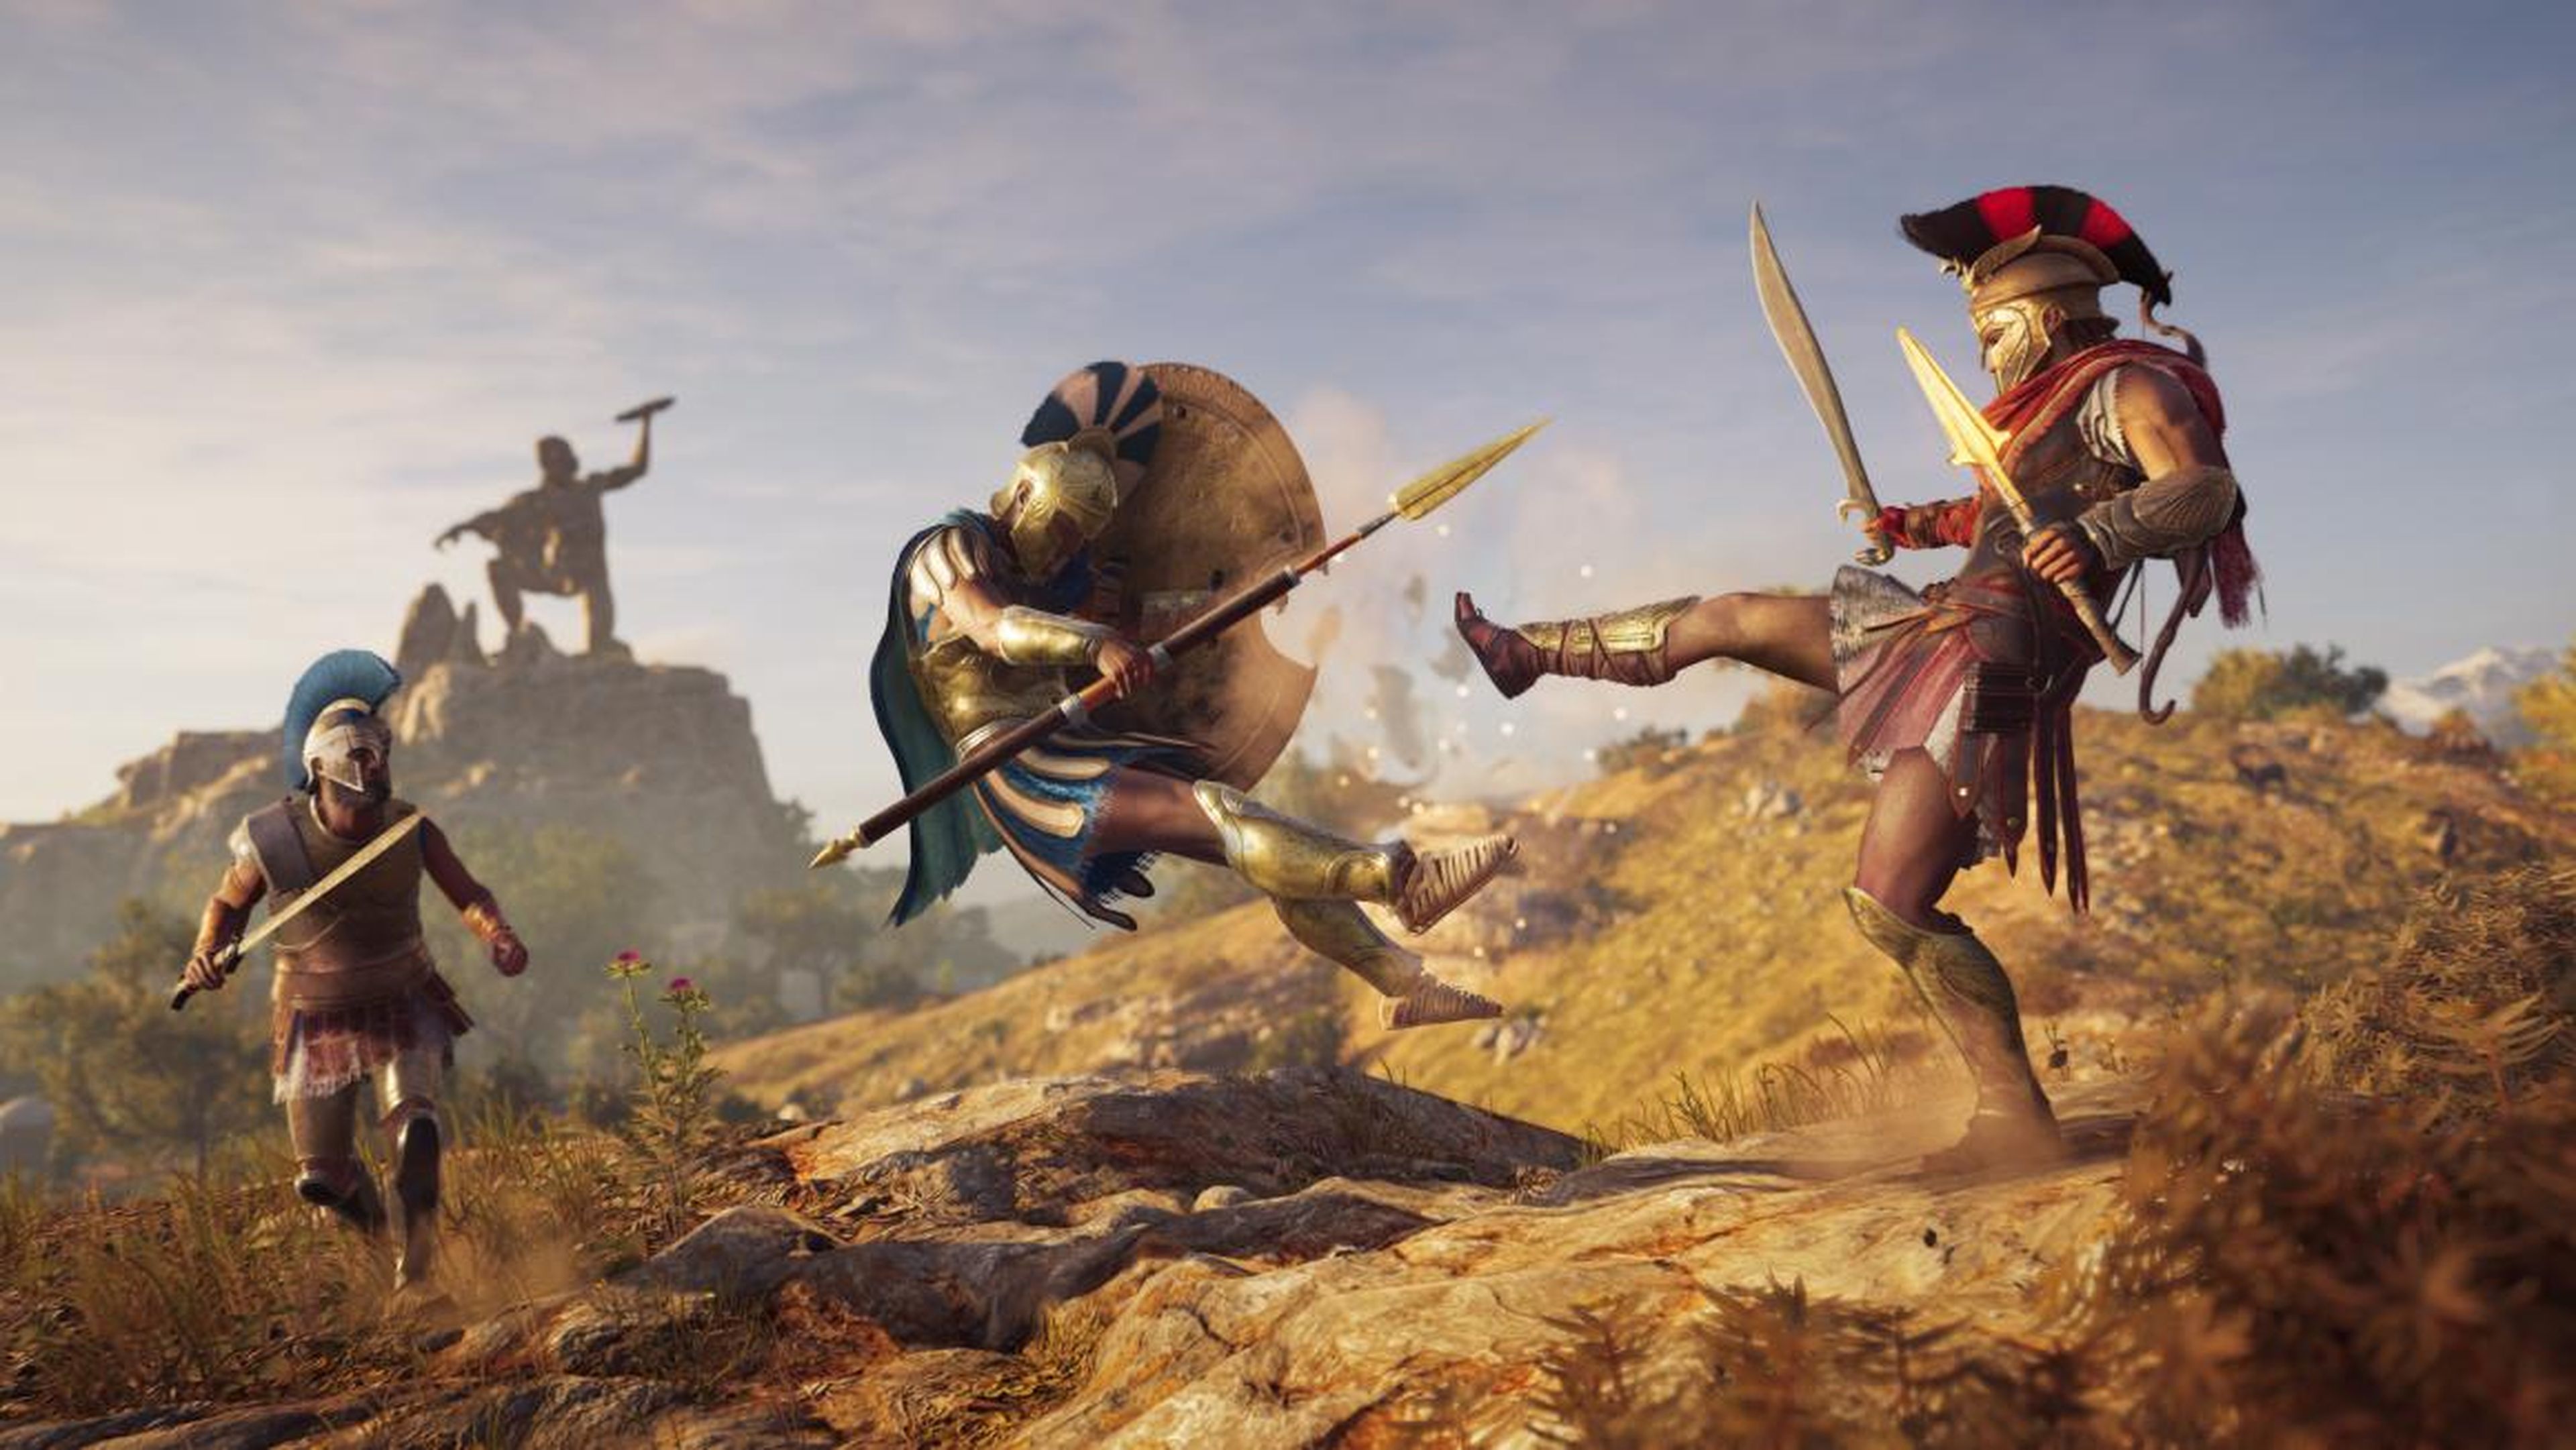 Google used the graphics-rich "Assassin's Creed Odyssey" to beta test its Project Stream service.